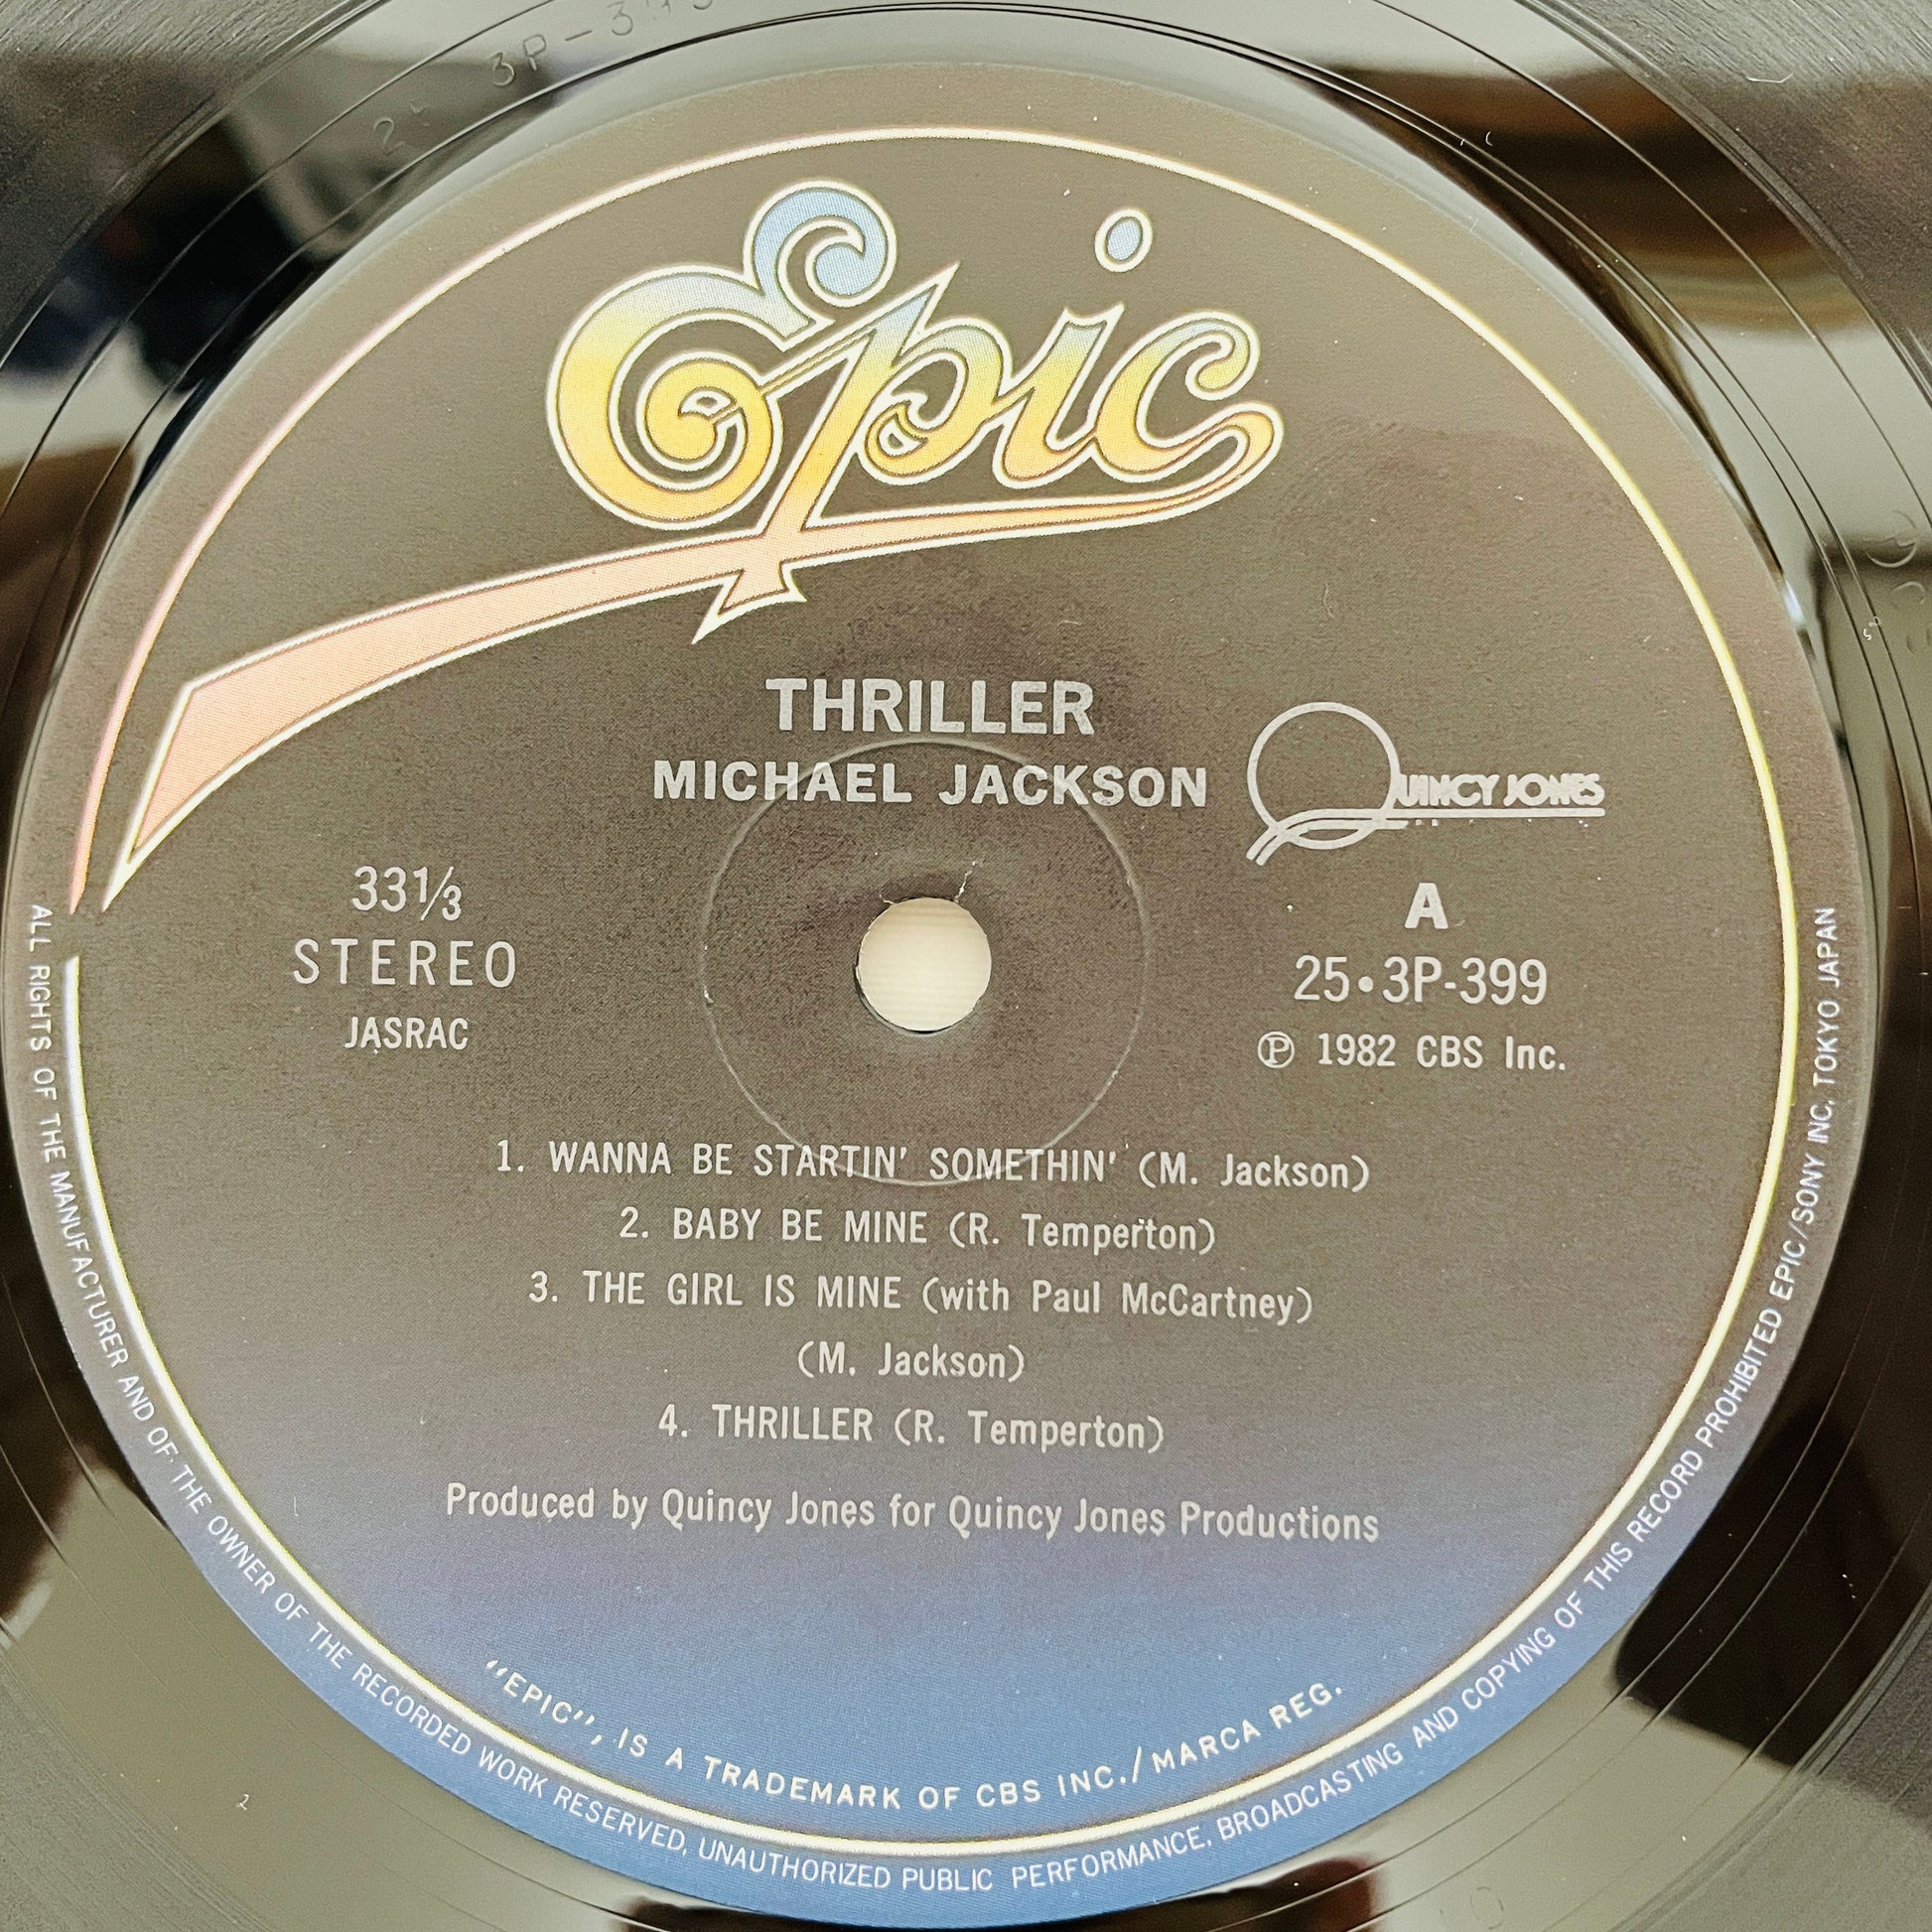  Michael Jackson Thriller - Epic Records 1982 - One